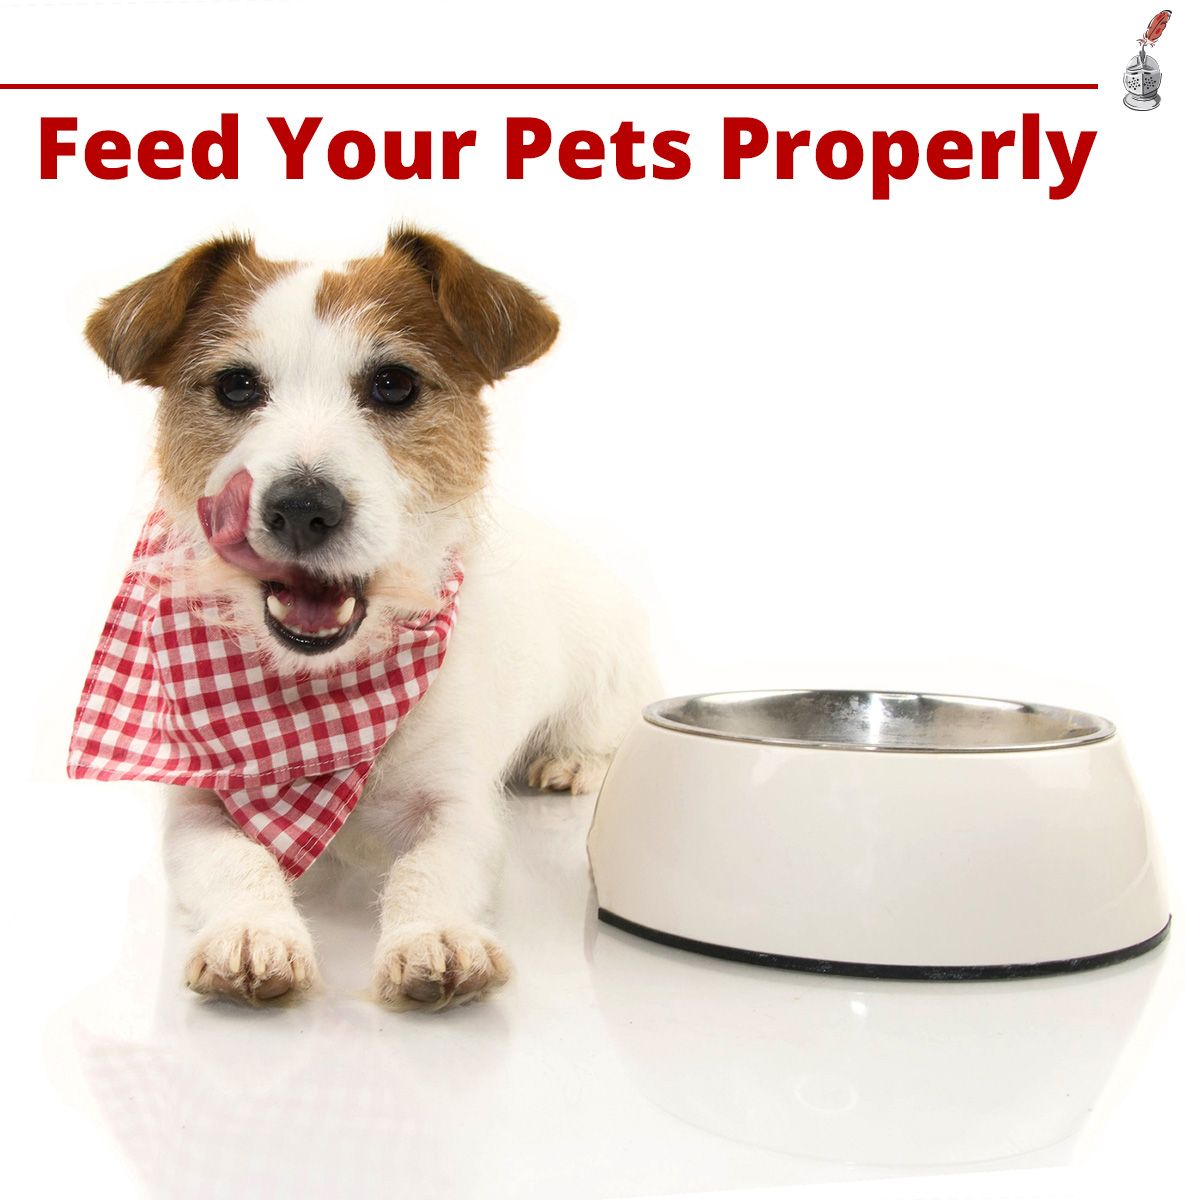 Feed Your Pets Properly